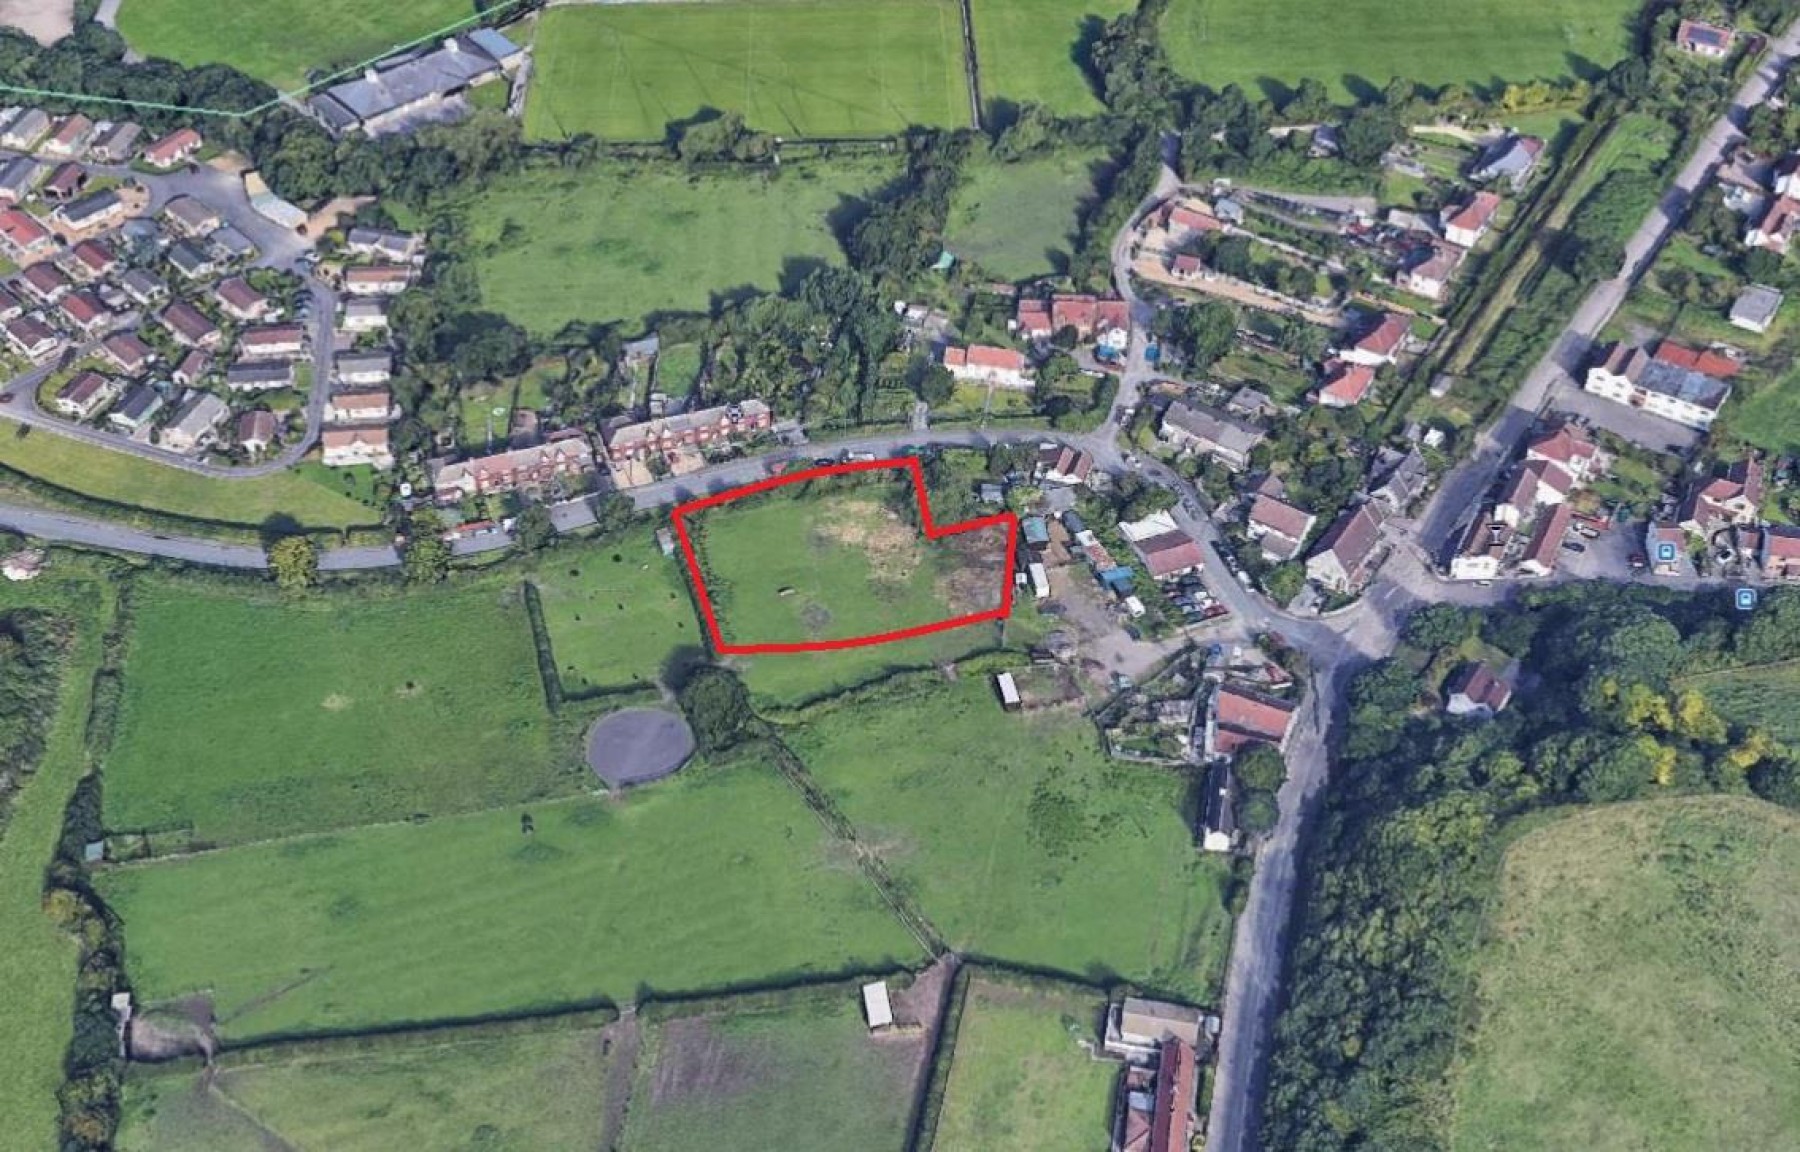 Images for 0.75 ACRE PLOT - PLANNING GRANTED